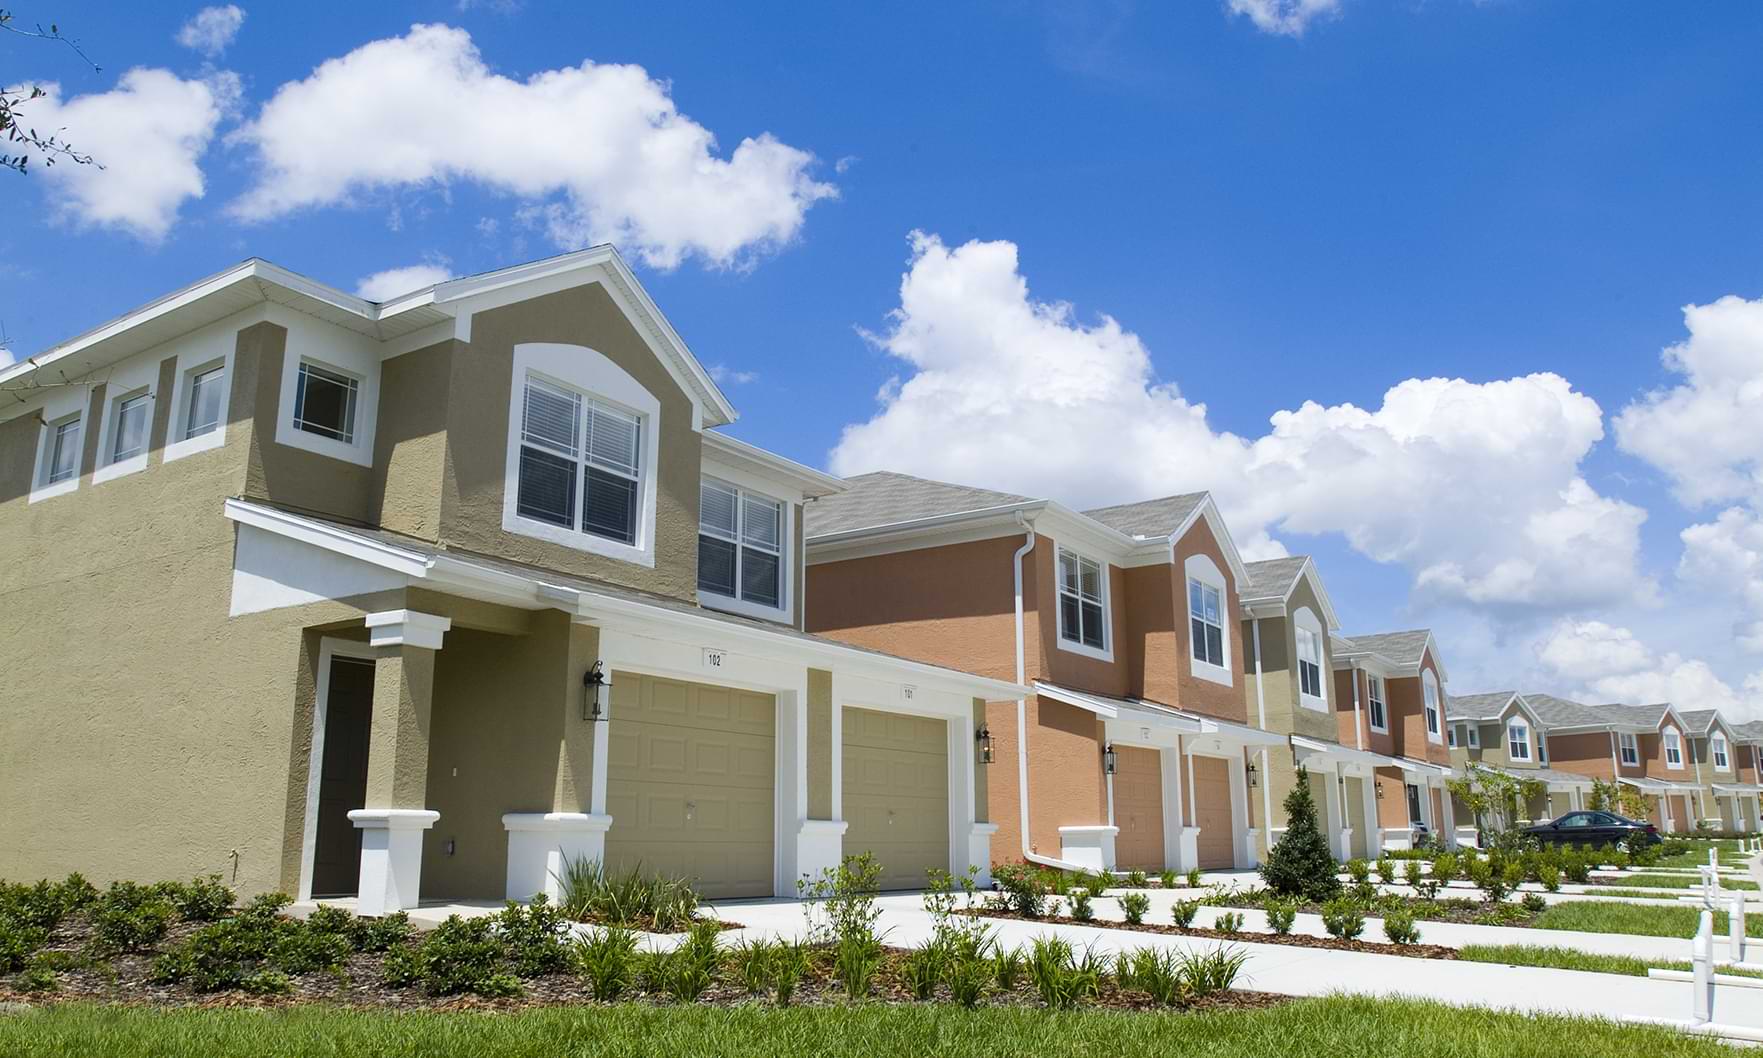 Florida’s Affordable Housing Law